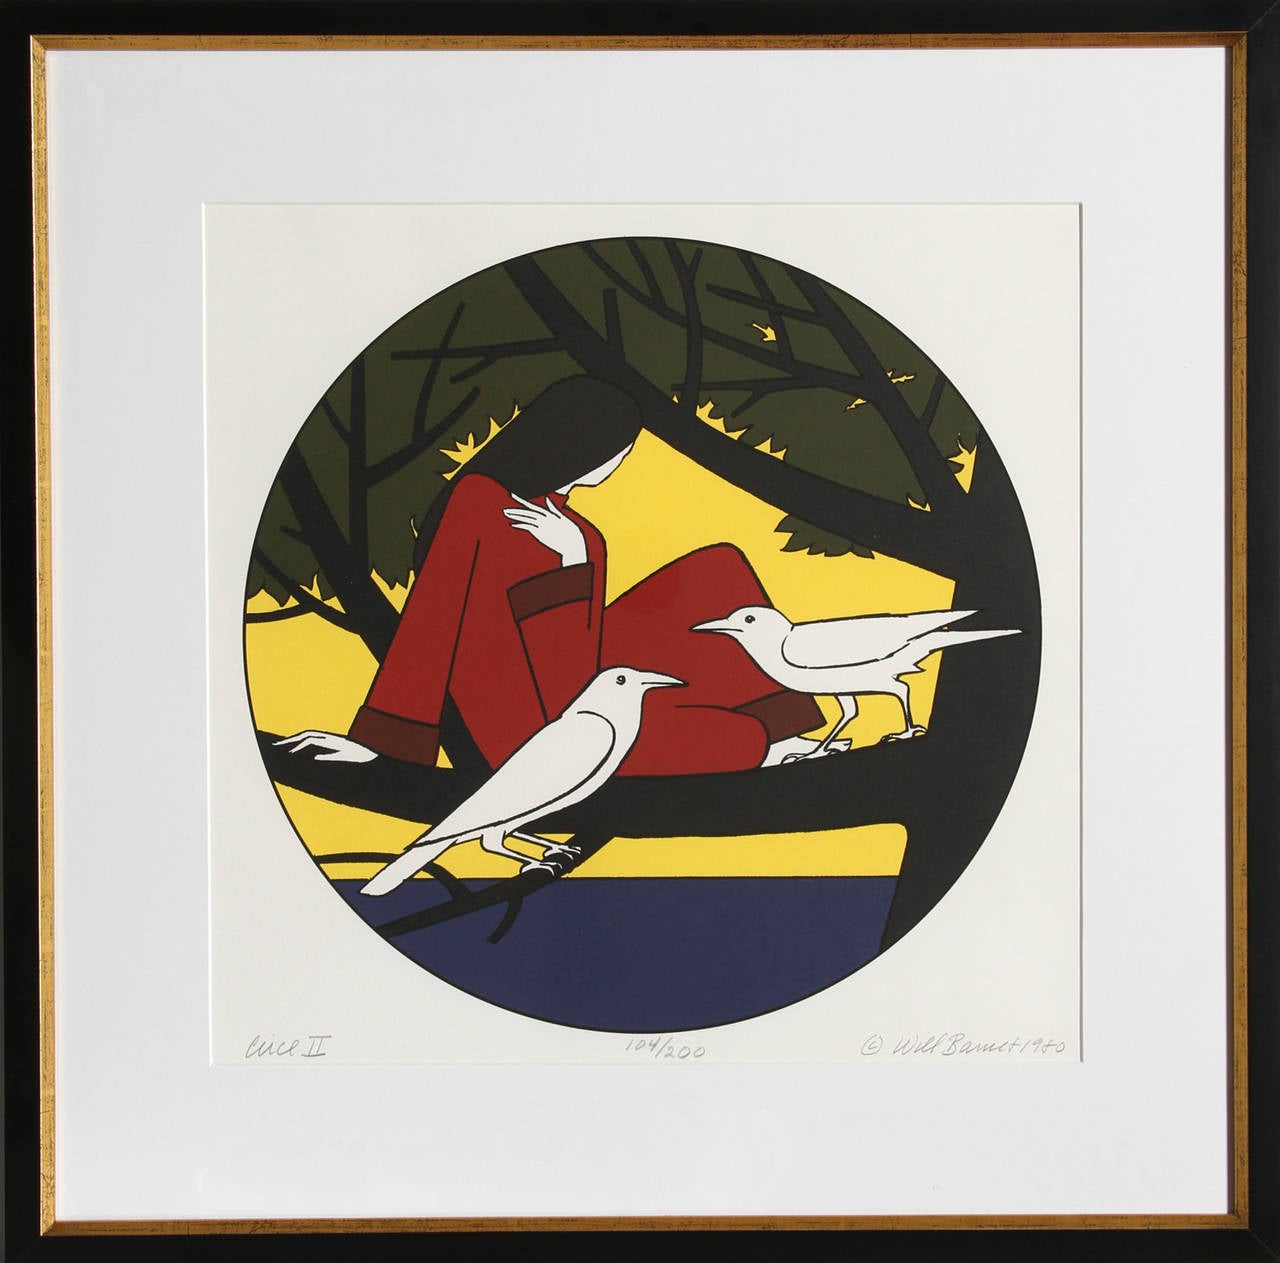 Artist: Will Barnet, American (1911 - 2012)
Title: Circe II
Year: 1980
Medium: Screenprint, signed and numbered in pencil
Edition: 200
Size: 20 in. x 20 in. (50.8 cm x 50.8 cm)
Frame Size: 23.5 x 23.5 inches